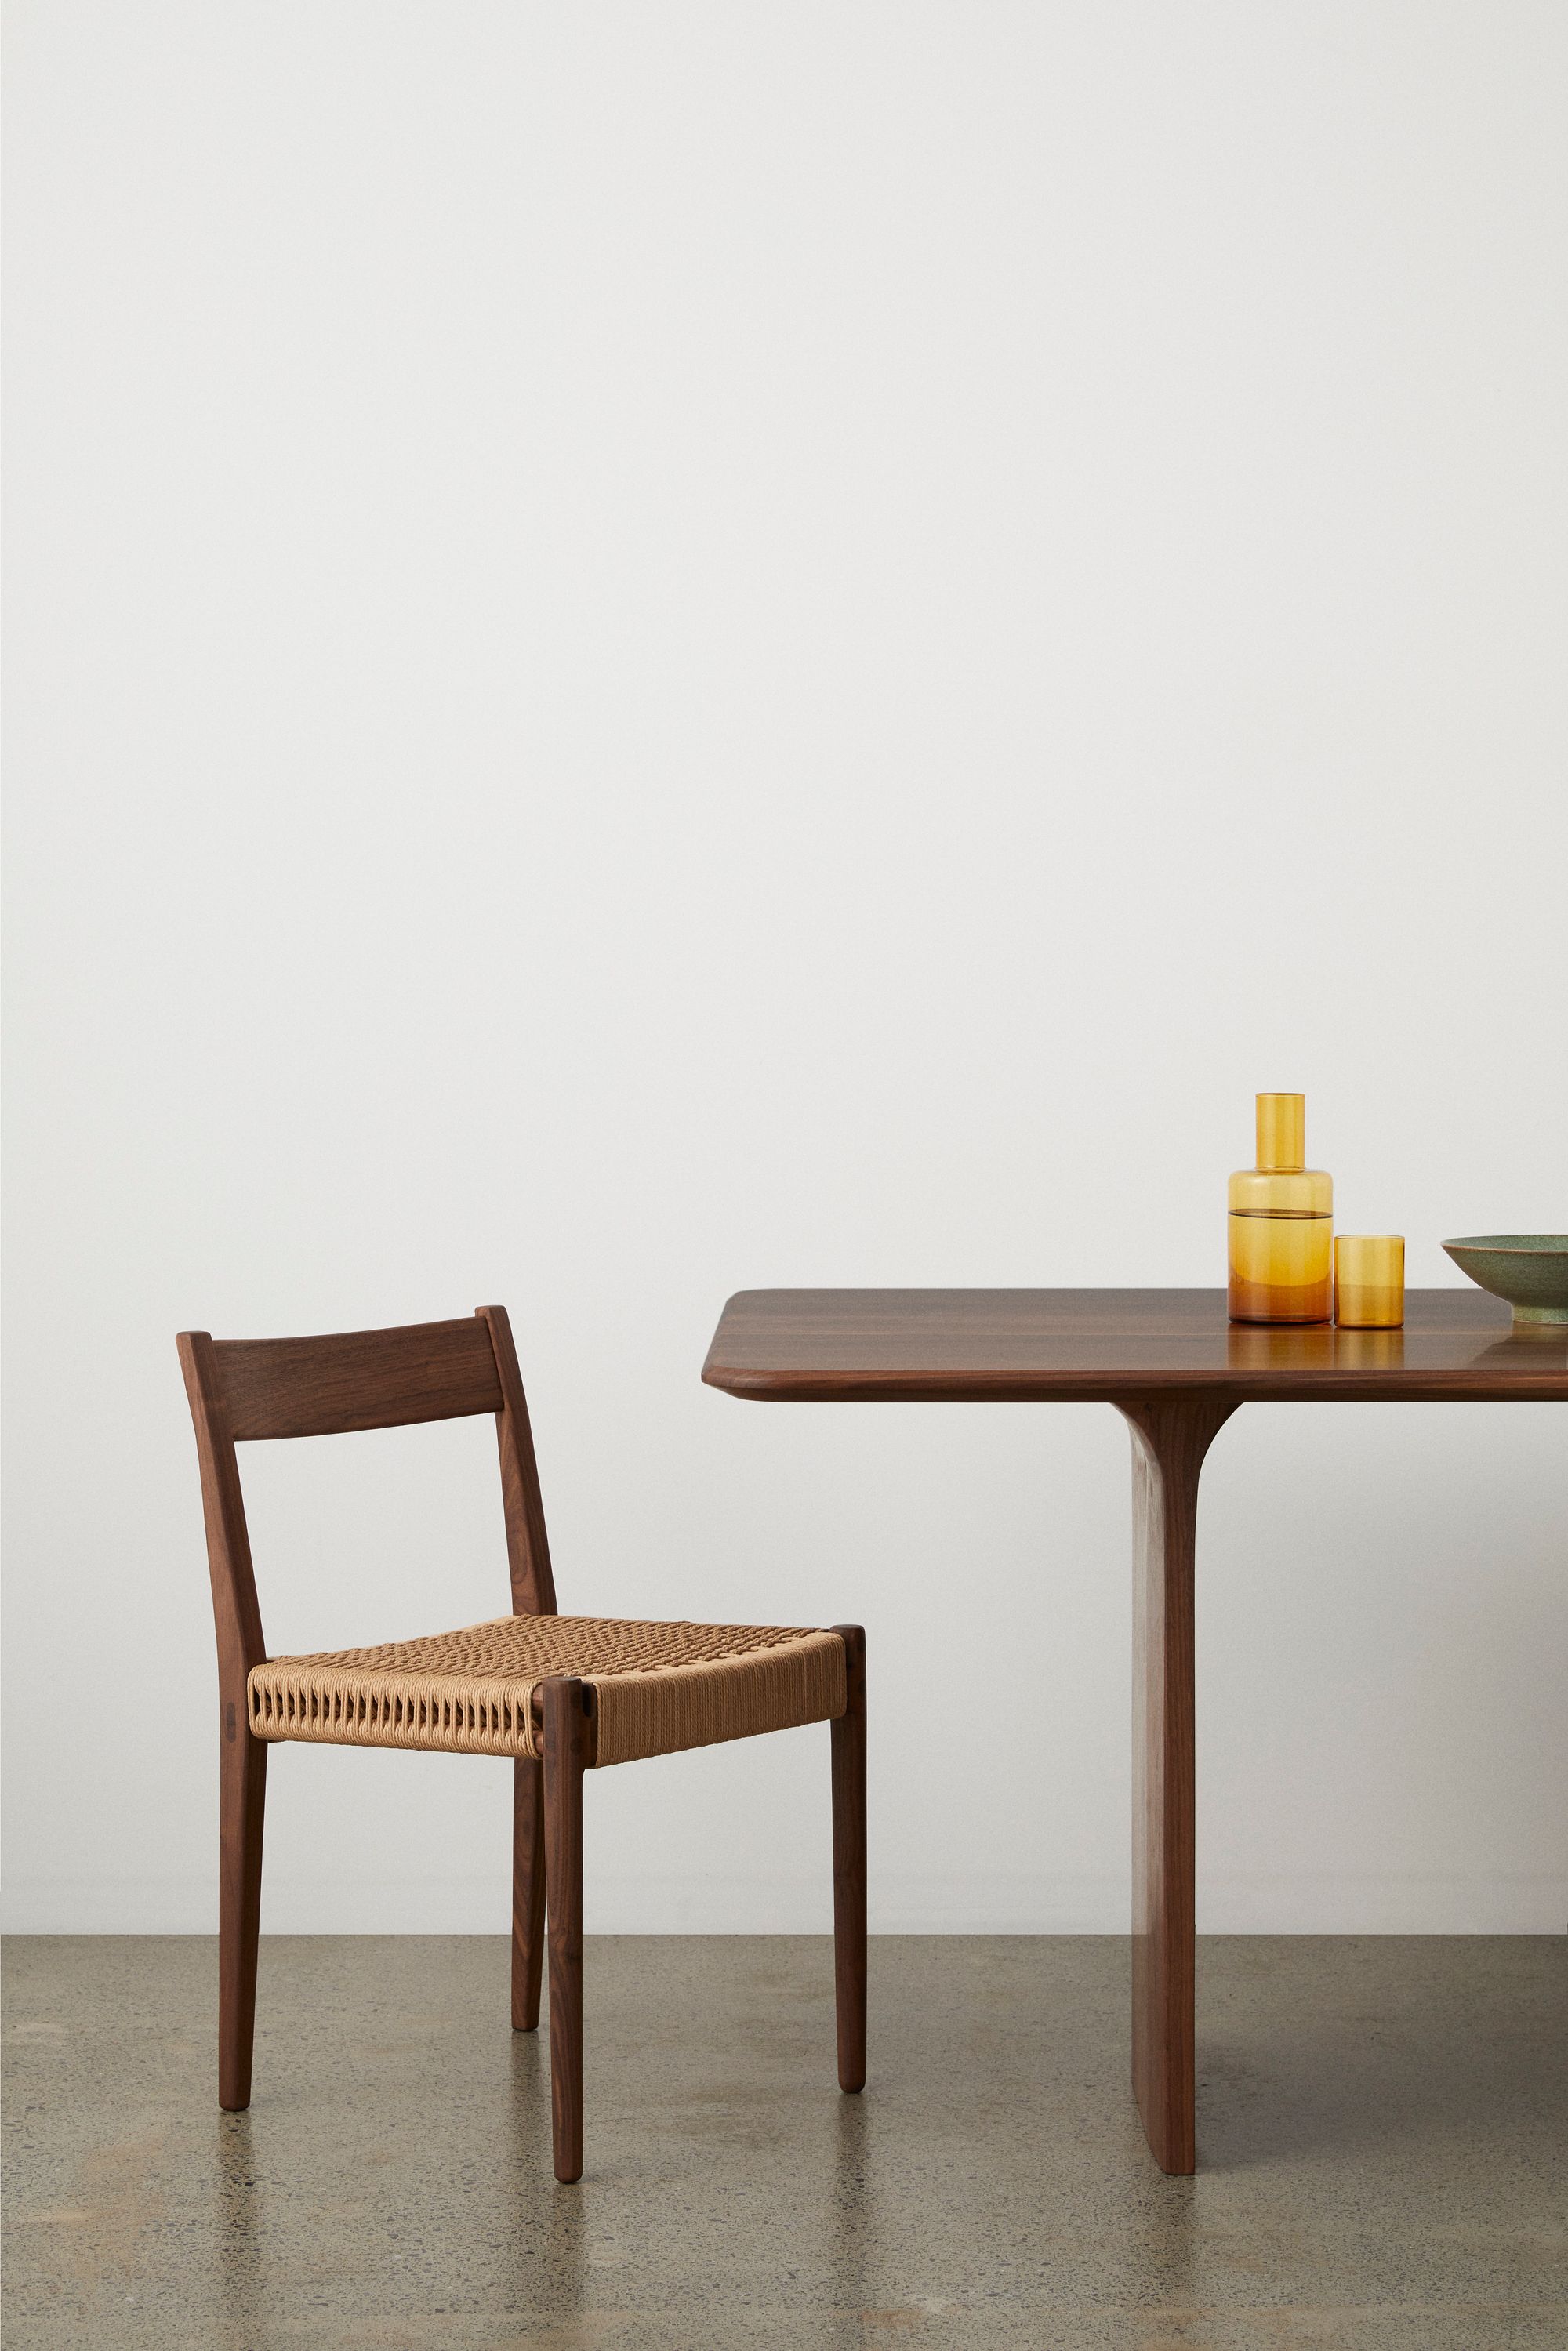 JD. Lee Furniture. A minimalist setting featuring a wooden dining chair with a woven seat, positioned adjacent to a matching wooden table. On the table, there are two yellow-toned glass containers of different sizes and a small greenish bowl. The furniture is set against a plain white backdrop and rests on a speckled concrete floor.